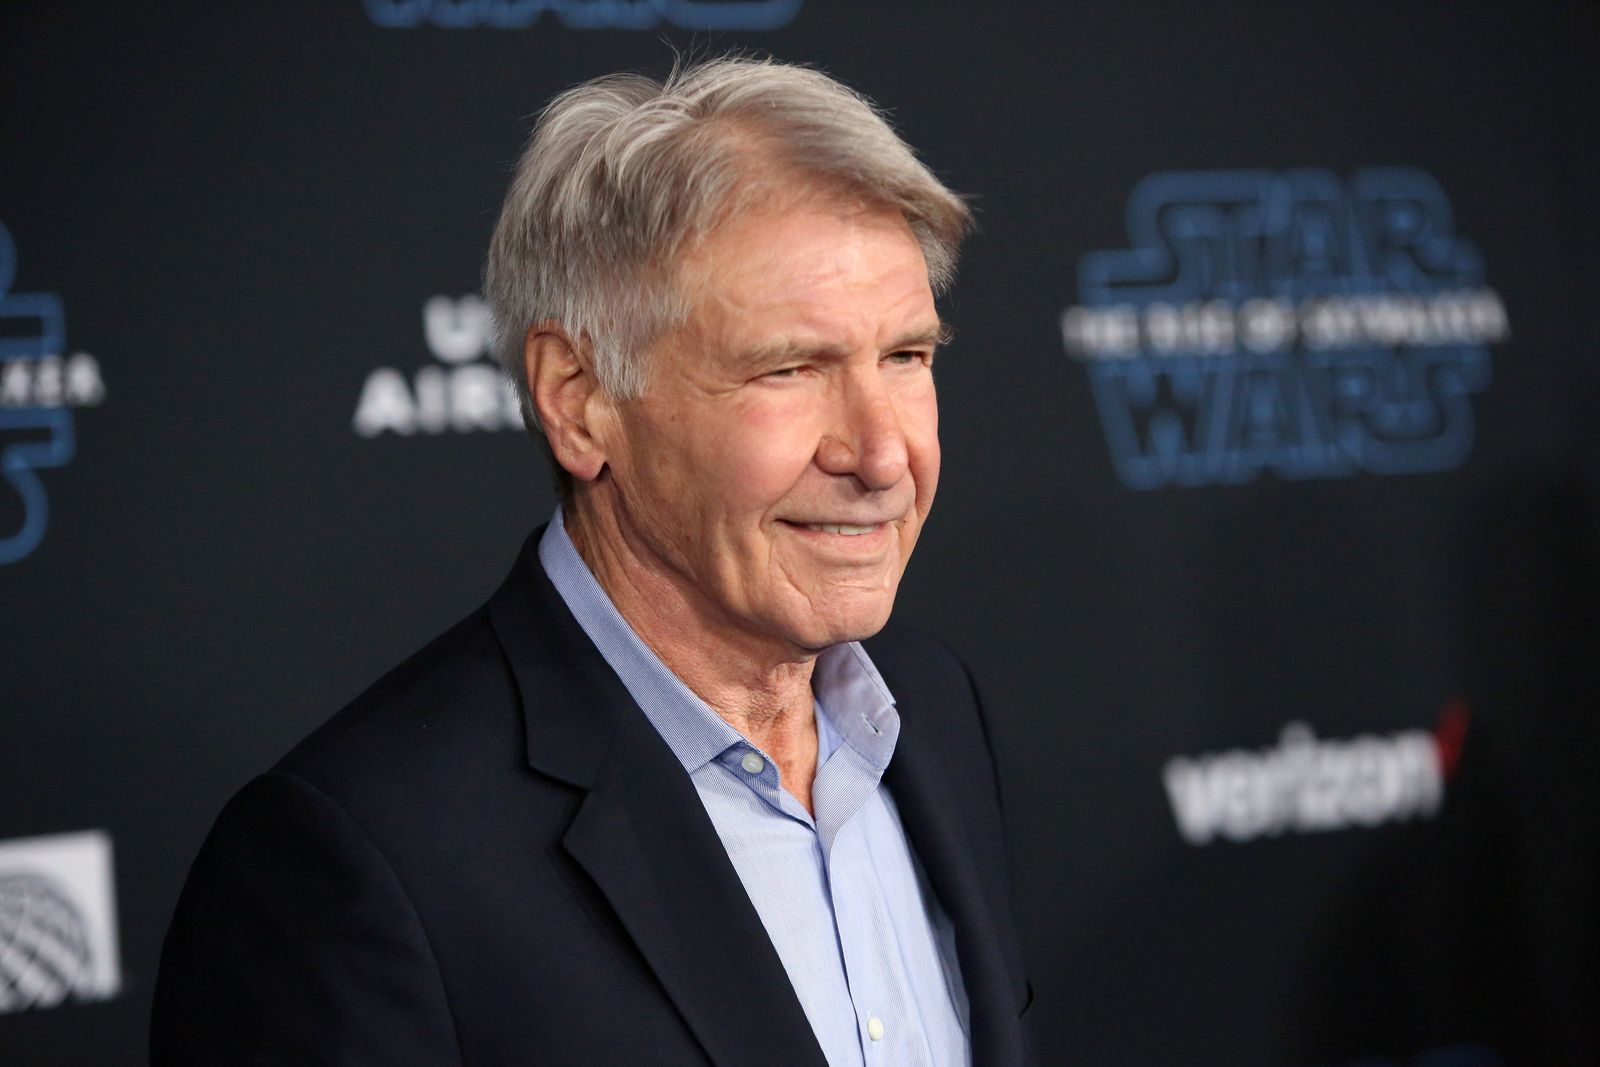 Harrison Ford at the world premiere of "Star Wars: The Rise of Skywalker" on December 16, 2019, in Hollywood, California | Photo: Jesse Grant/Getty Images